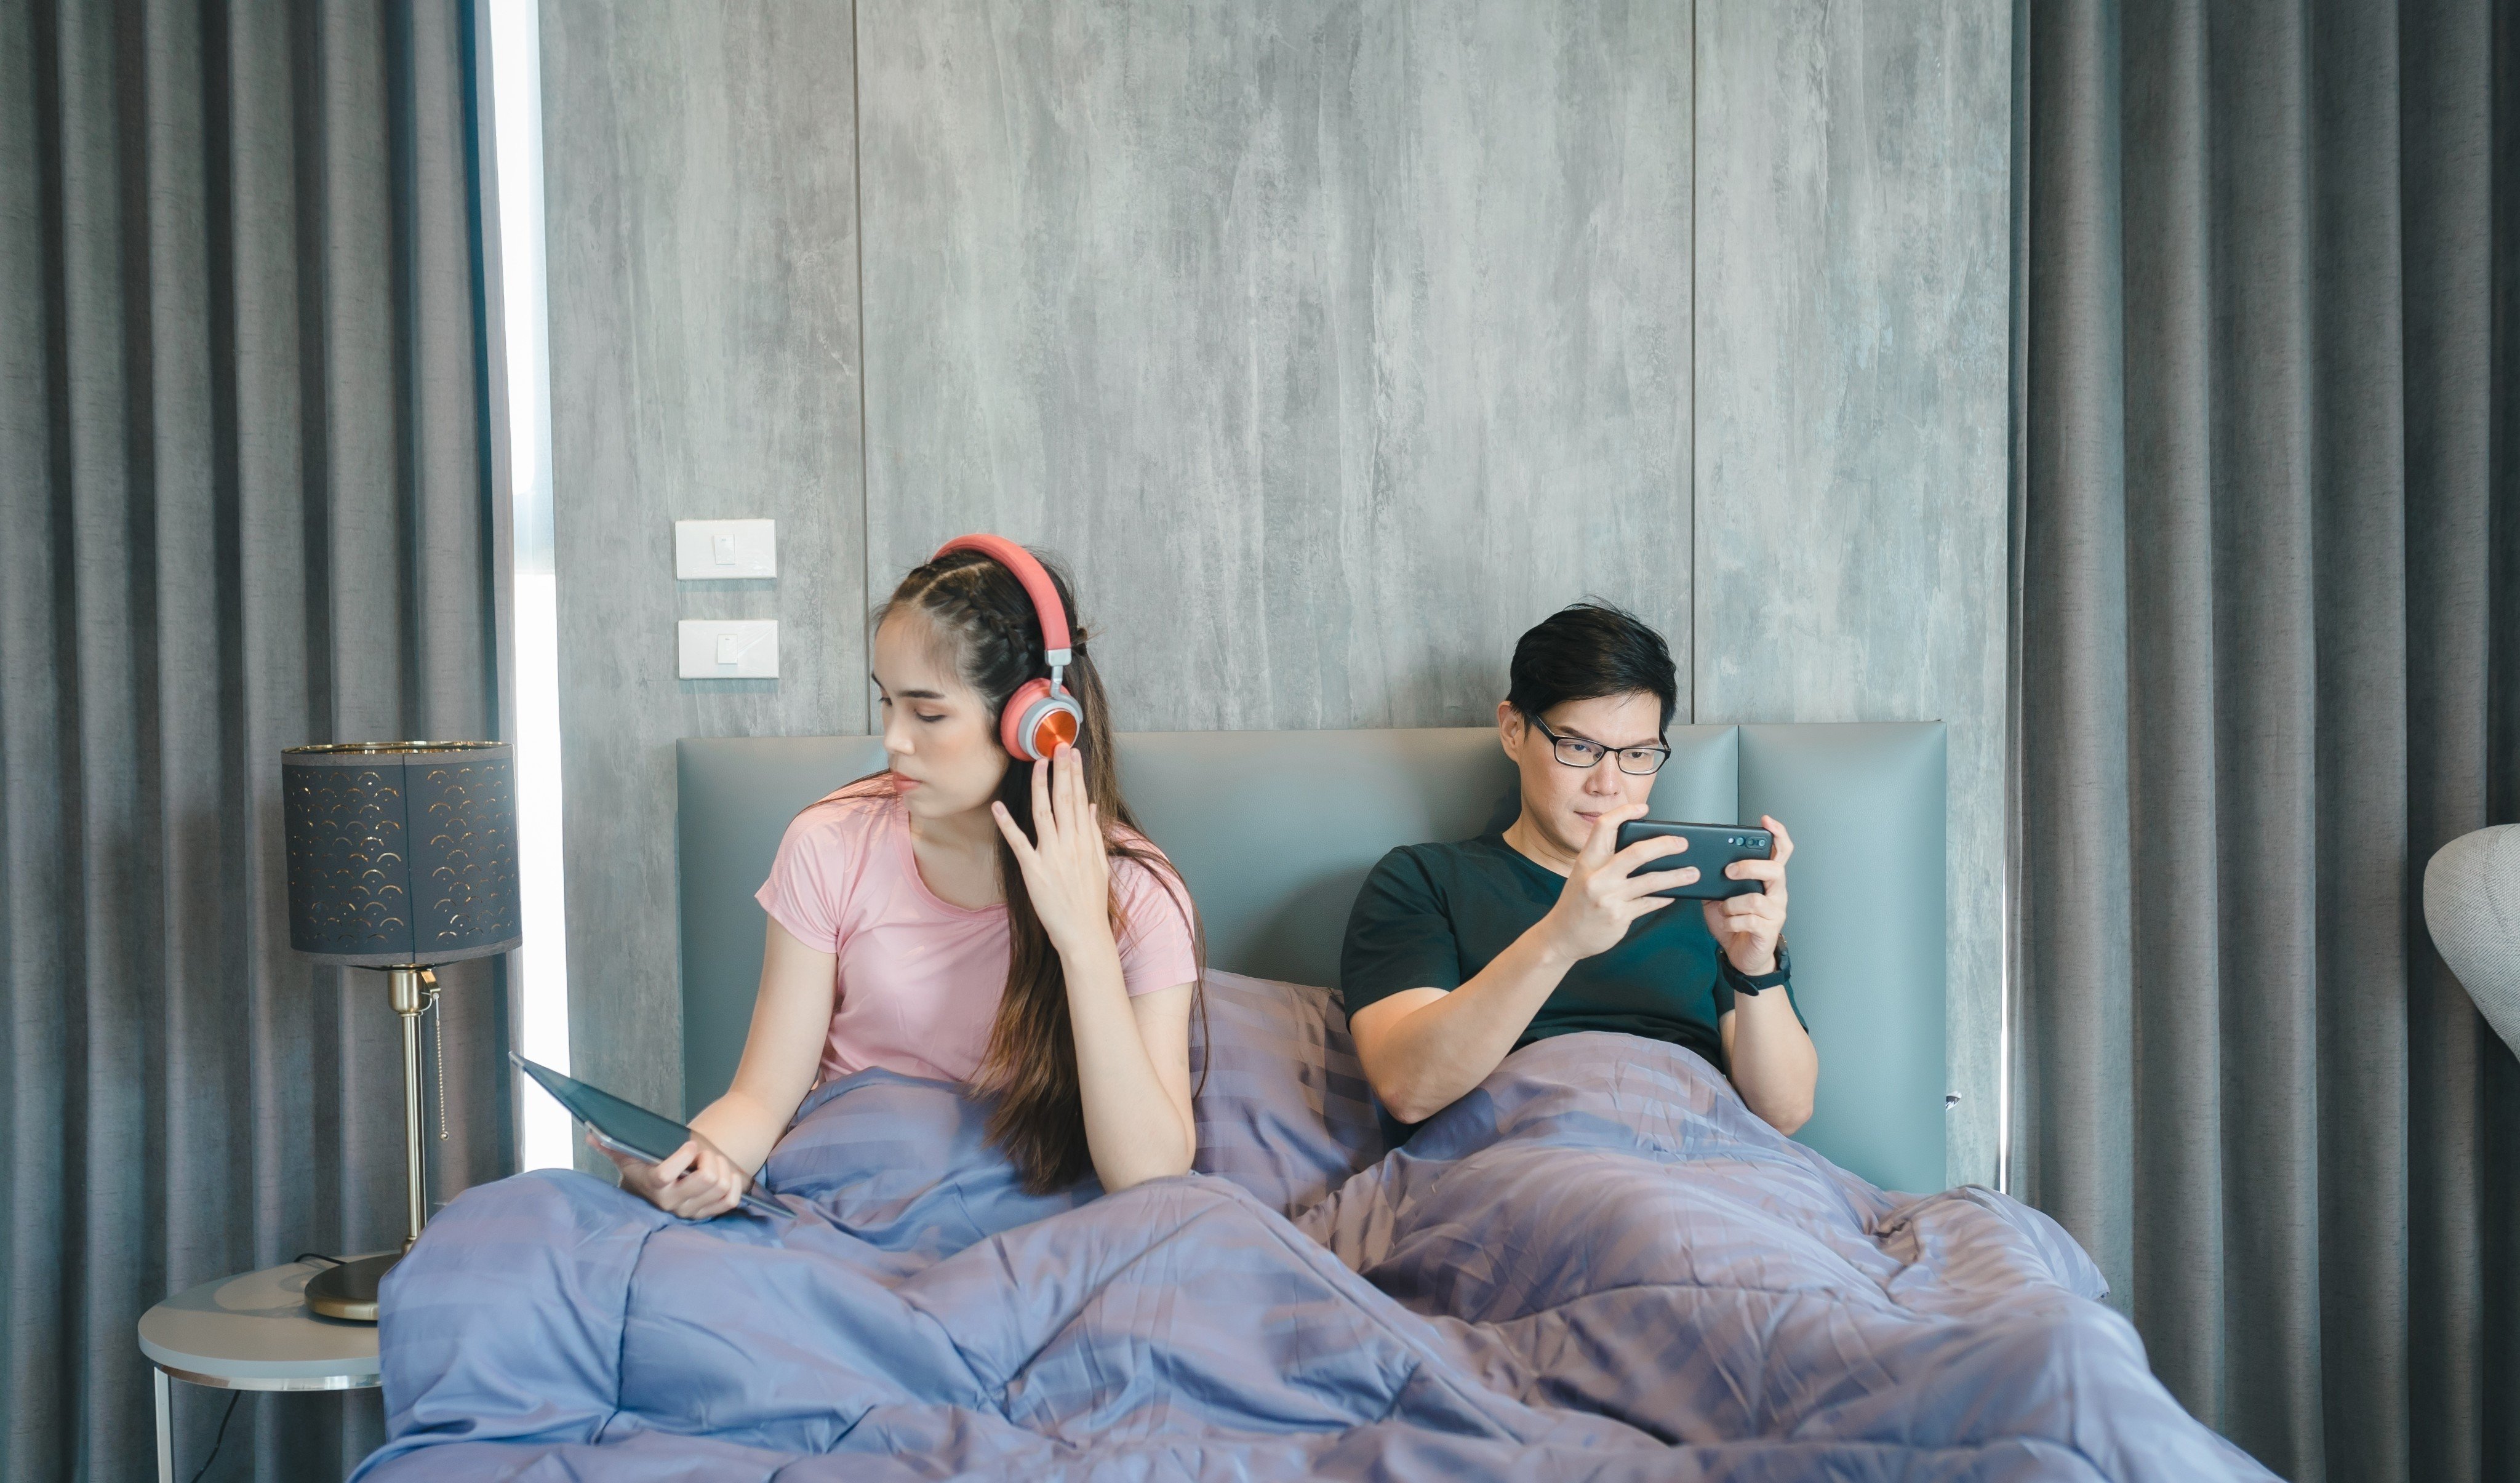 Many people would rather go without sex than their phones, a clinical psychologist says. Photo: Shutterstock